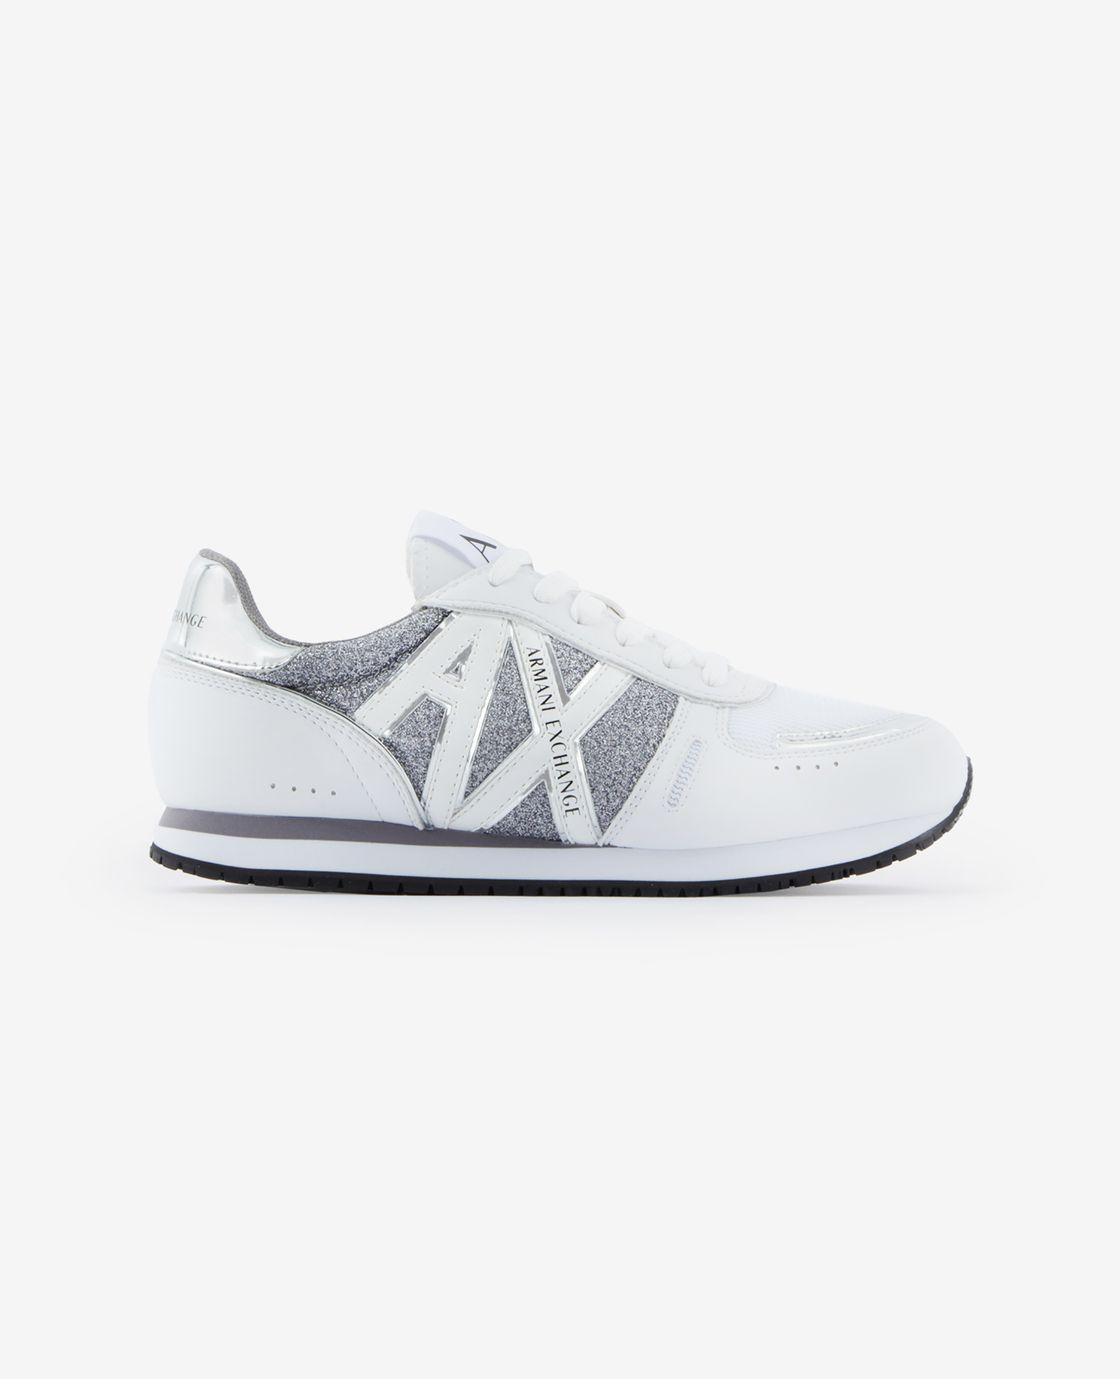 Armani Exchange Shoes in White | Lyst